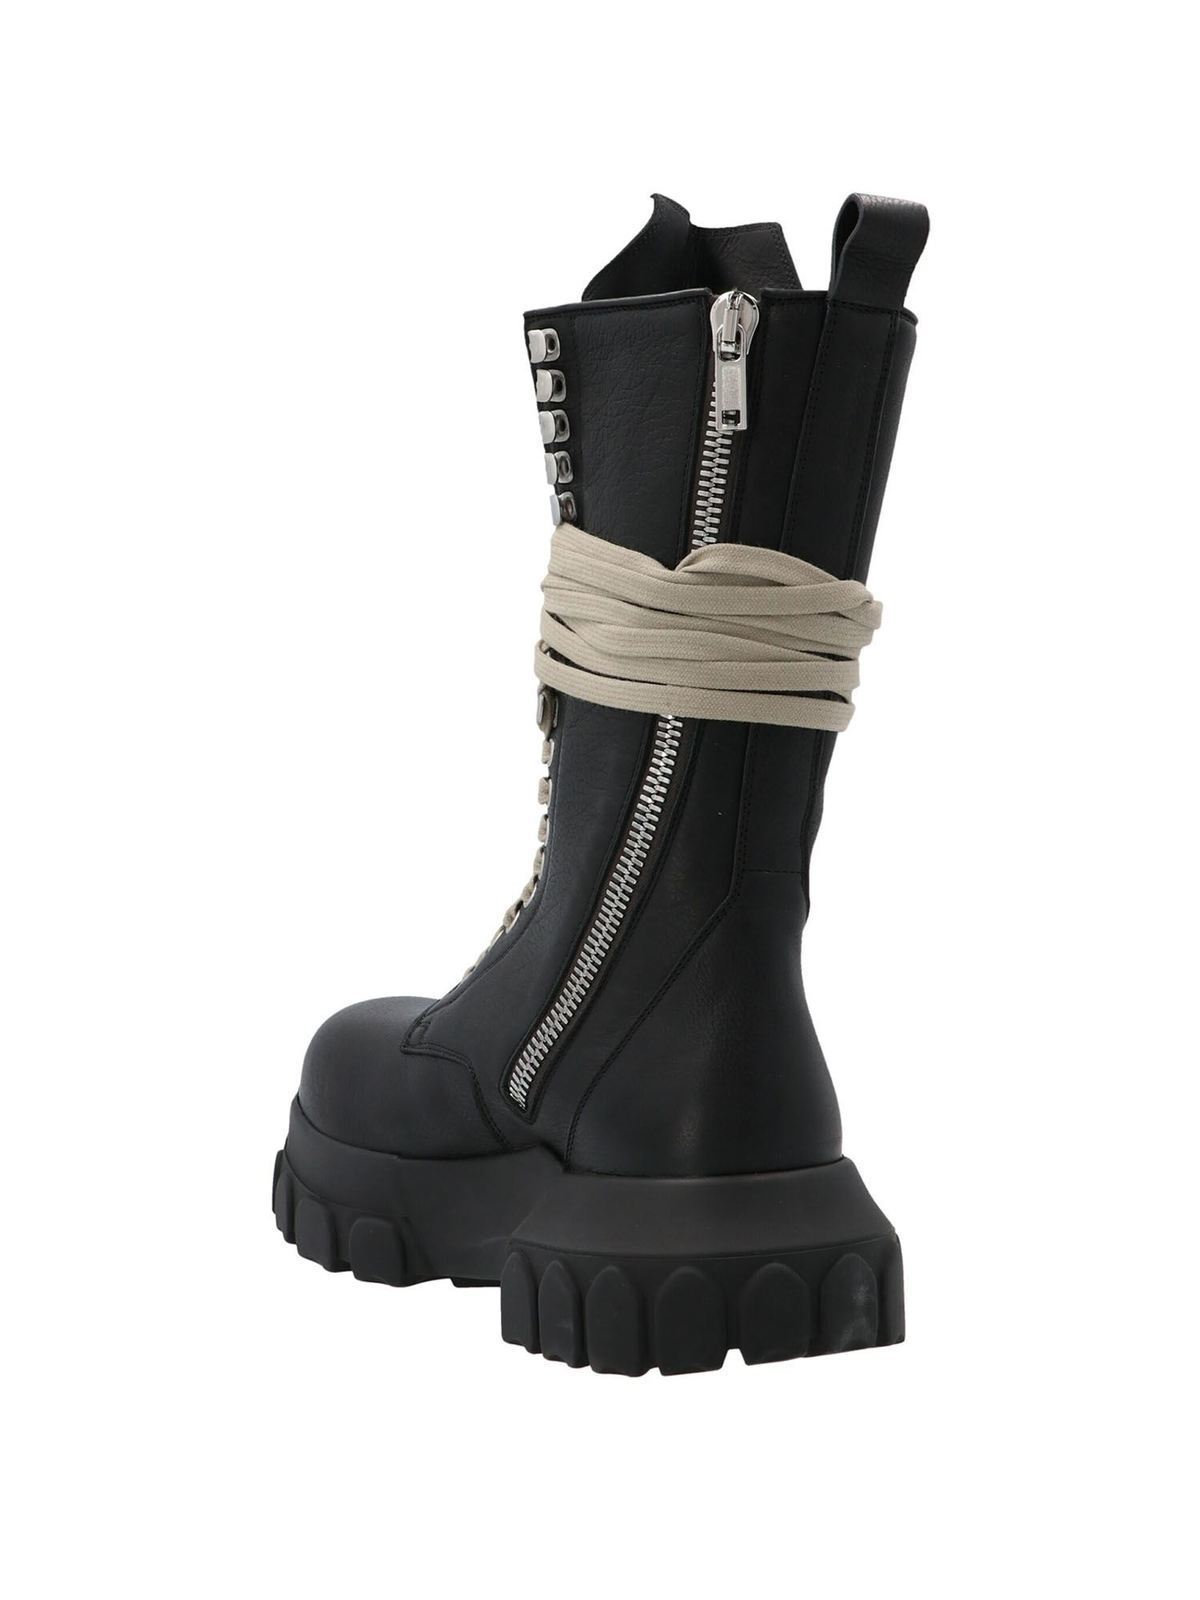 Rick Owens Hun - Laceup Bozo Tractor boots in black - boots